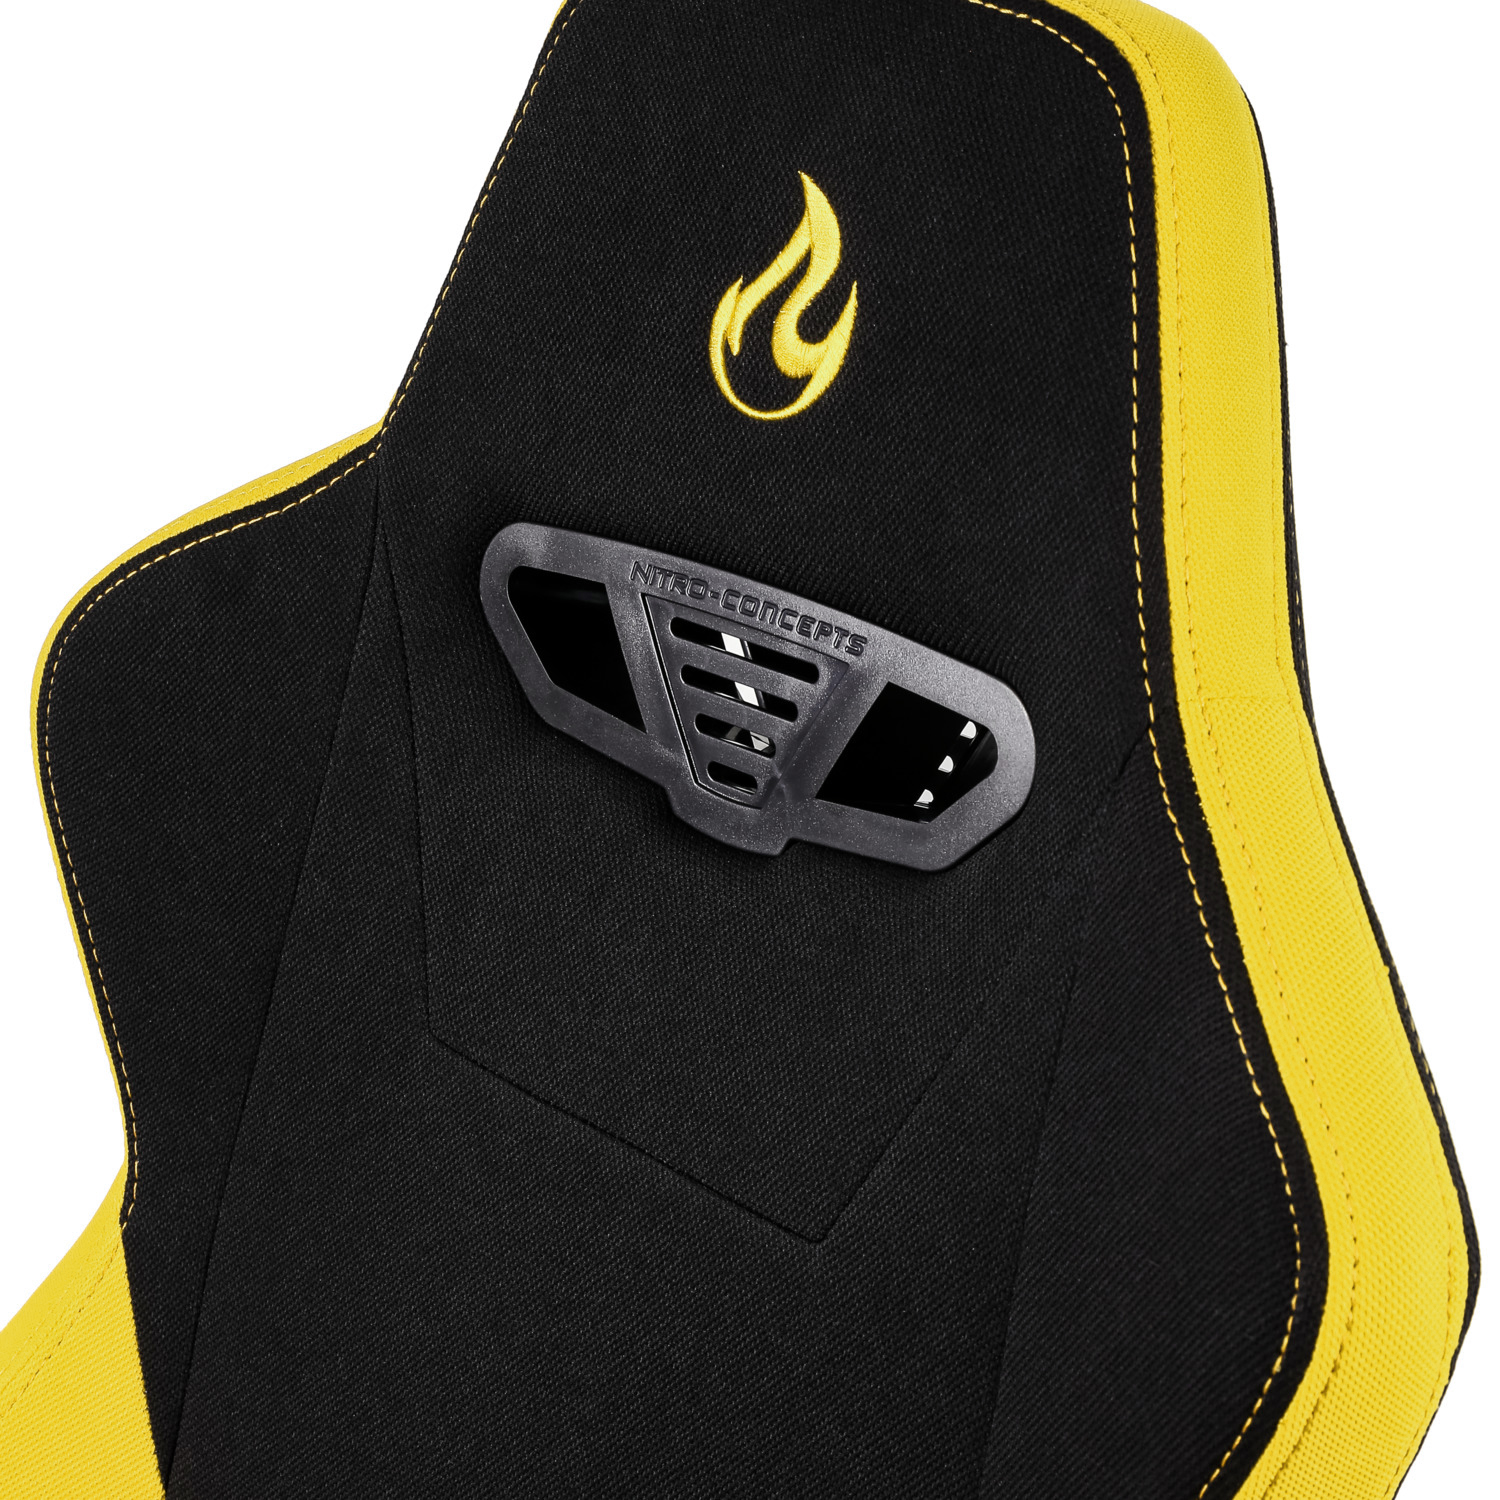 nitro-concepts - S300 Gaming Stuhl Astral Yellow